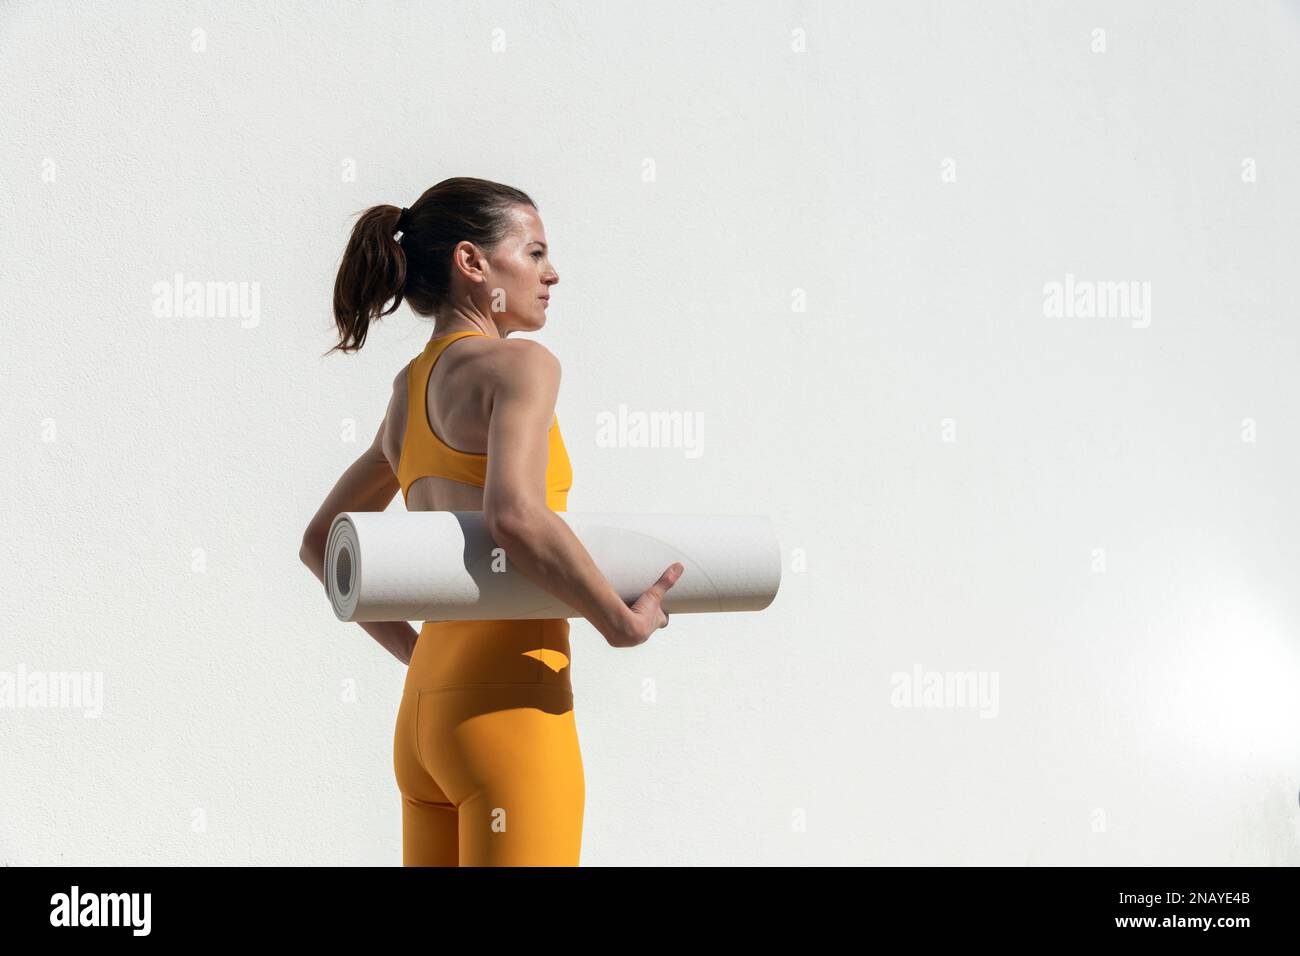 Sporty female carrying a yoga, exercise mat, outside by a white wall. Stock Photo